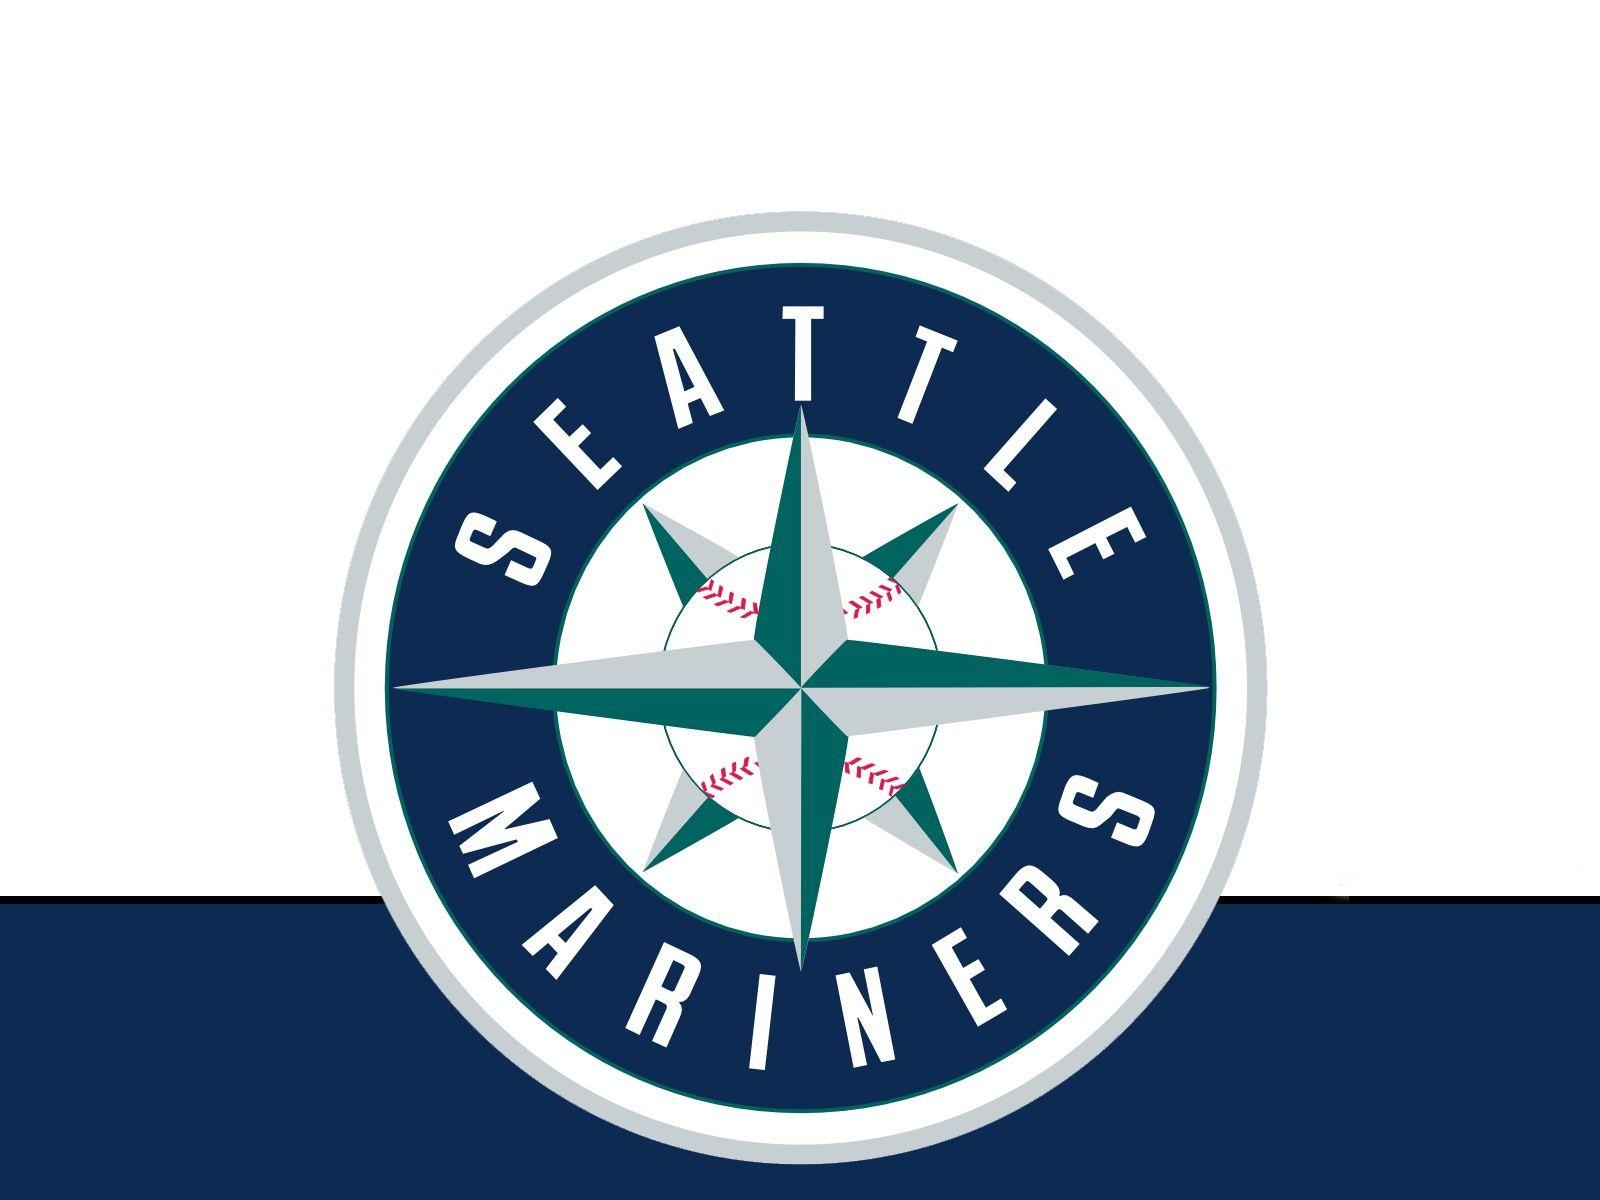 Seattle Mariners Wallpapers - Wallpaper Cave